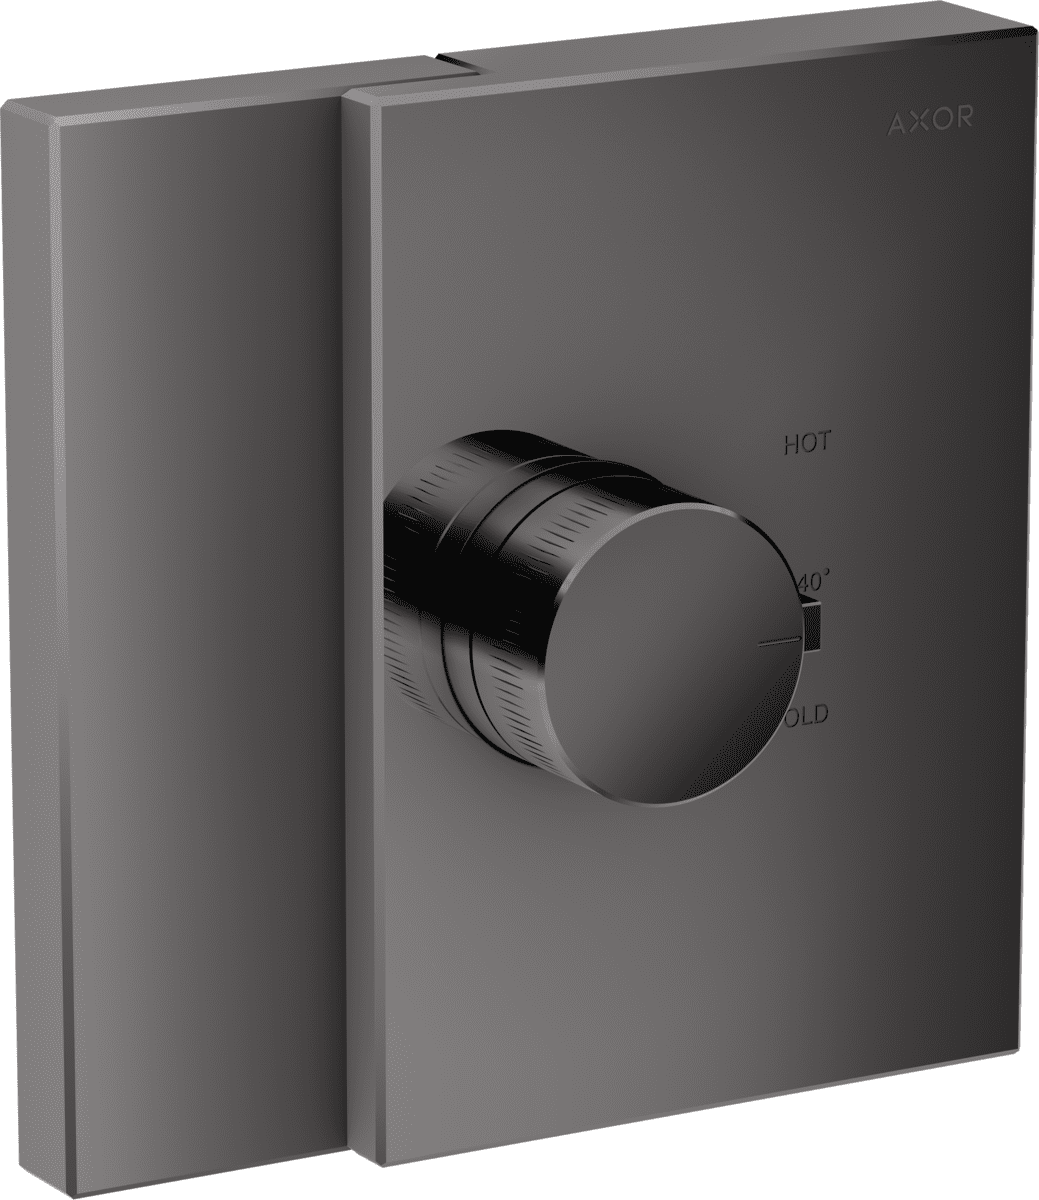 Picture of HANSGROHE AXOR Edge Thermostat HighFlow for concealed installation #46740330 - Polished Black Chrome